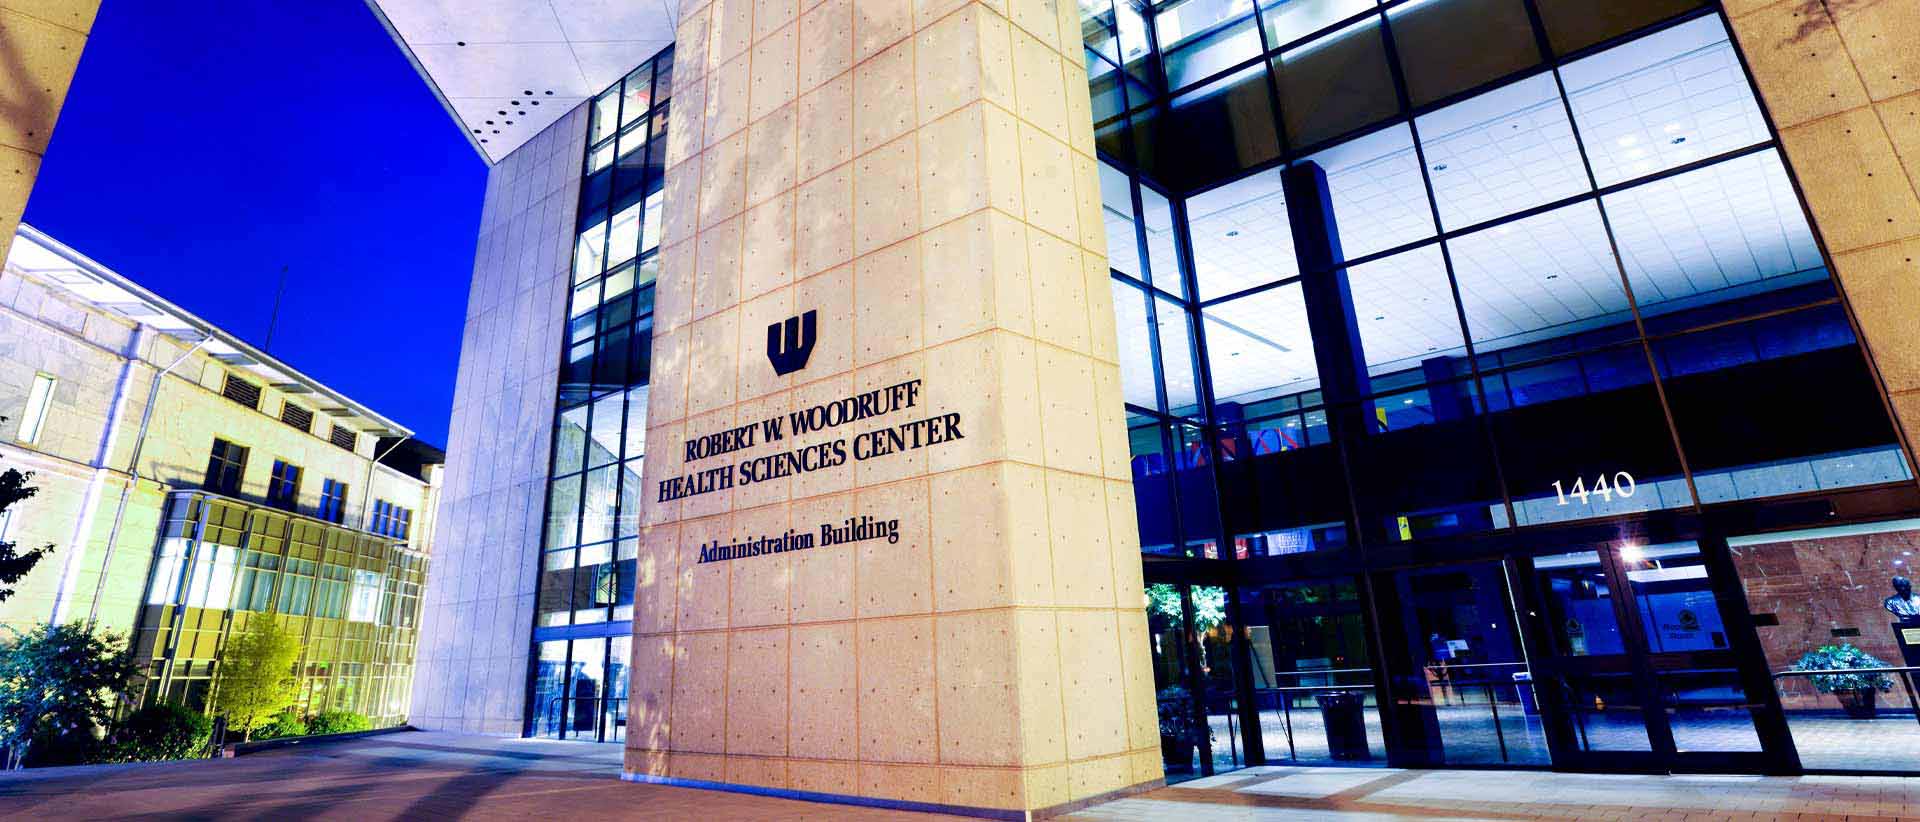 exterior view of woodruff health sciences center building entrance